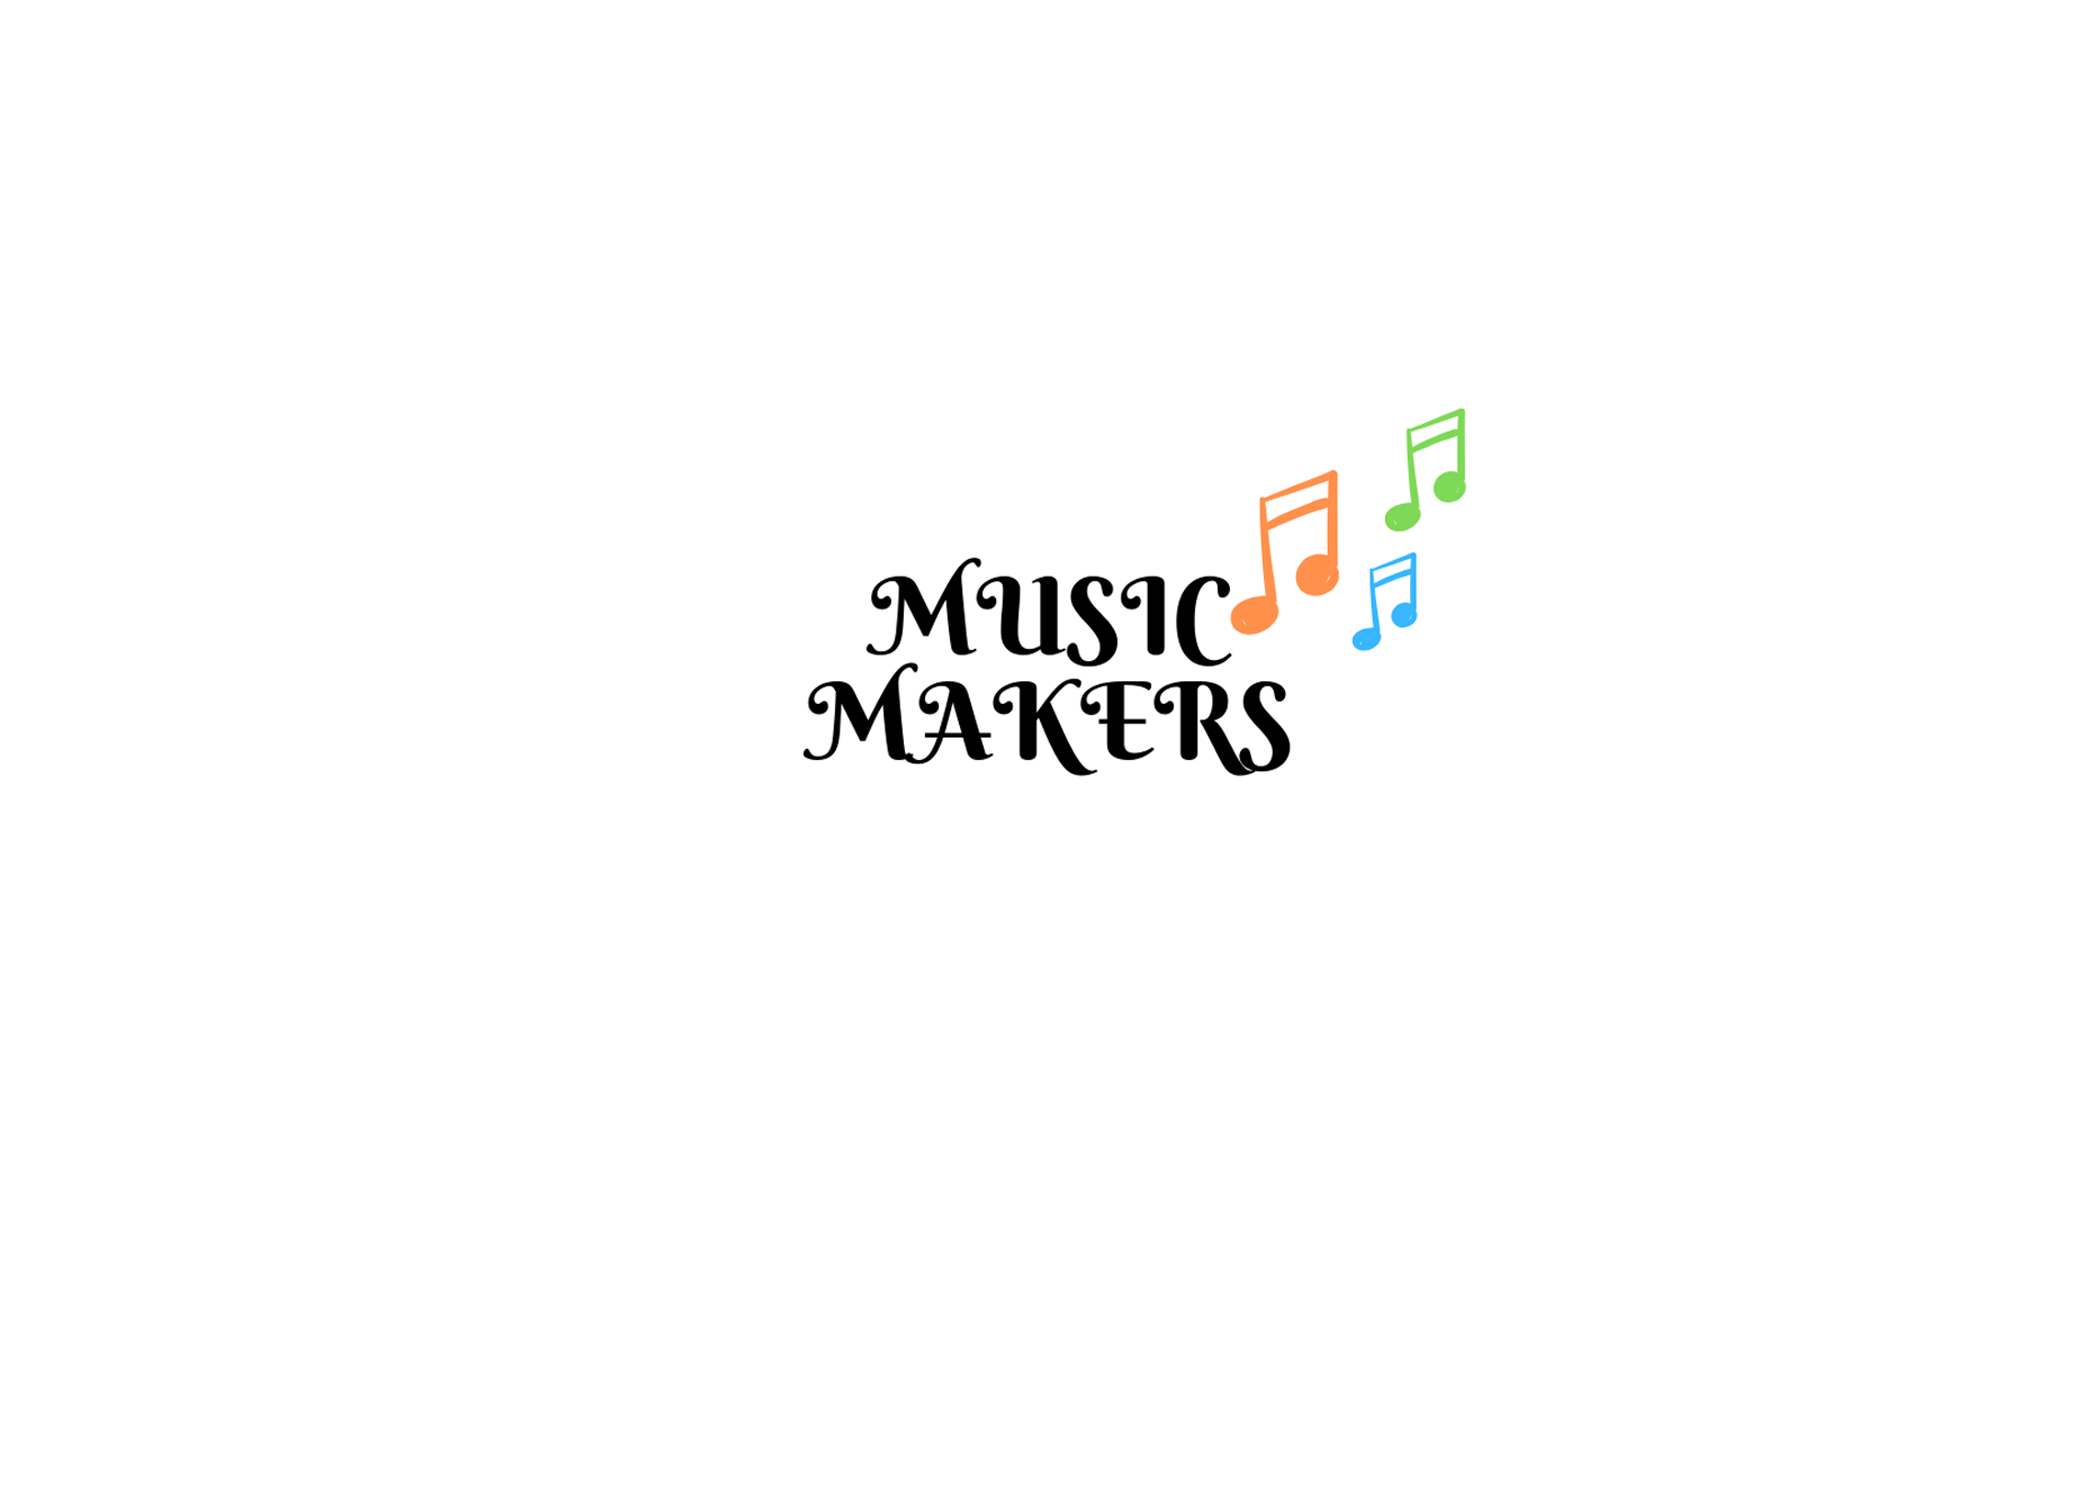 Music Makers logo graphic